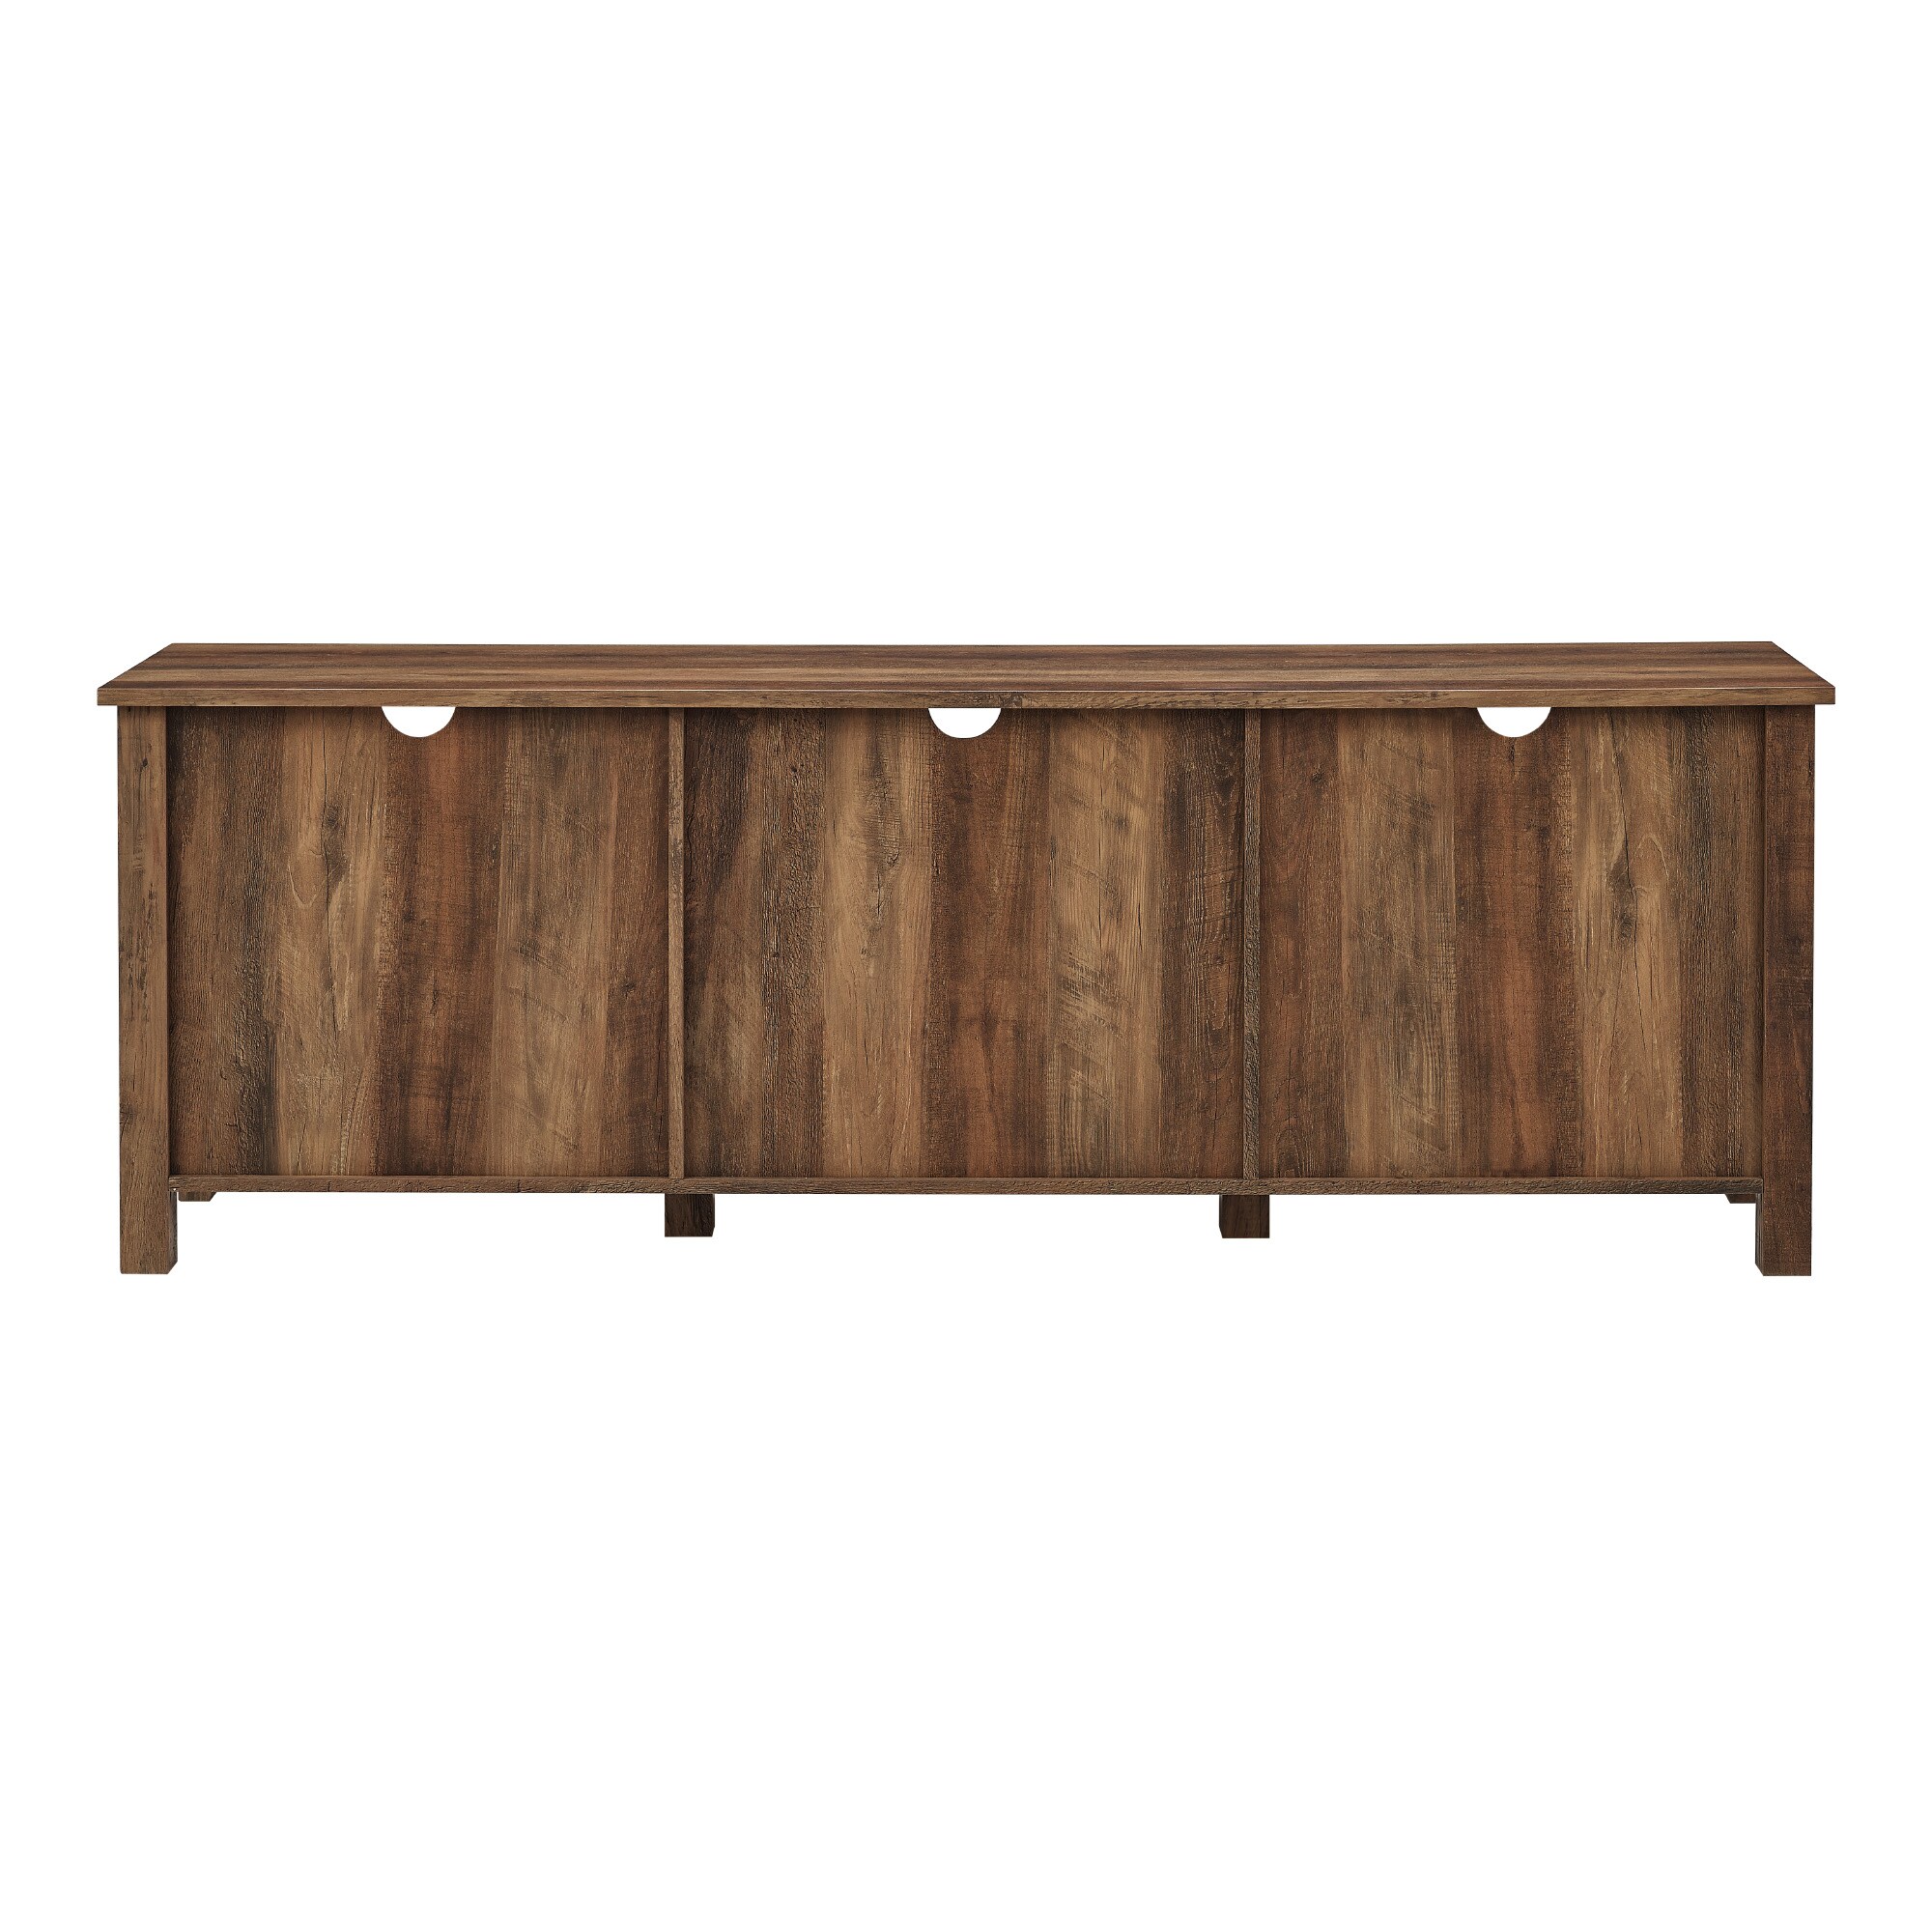 Walker Edison Transitional Rustic Oak Tv Stand (Accommodates TVs up to ...